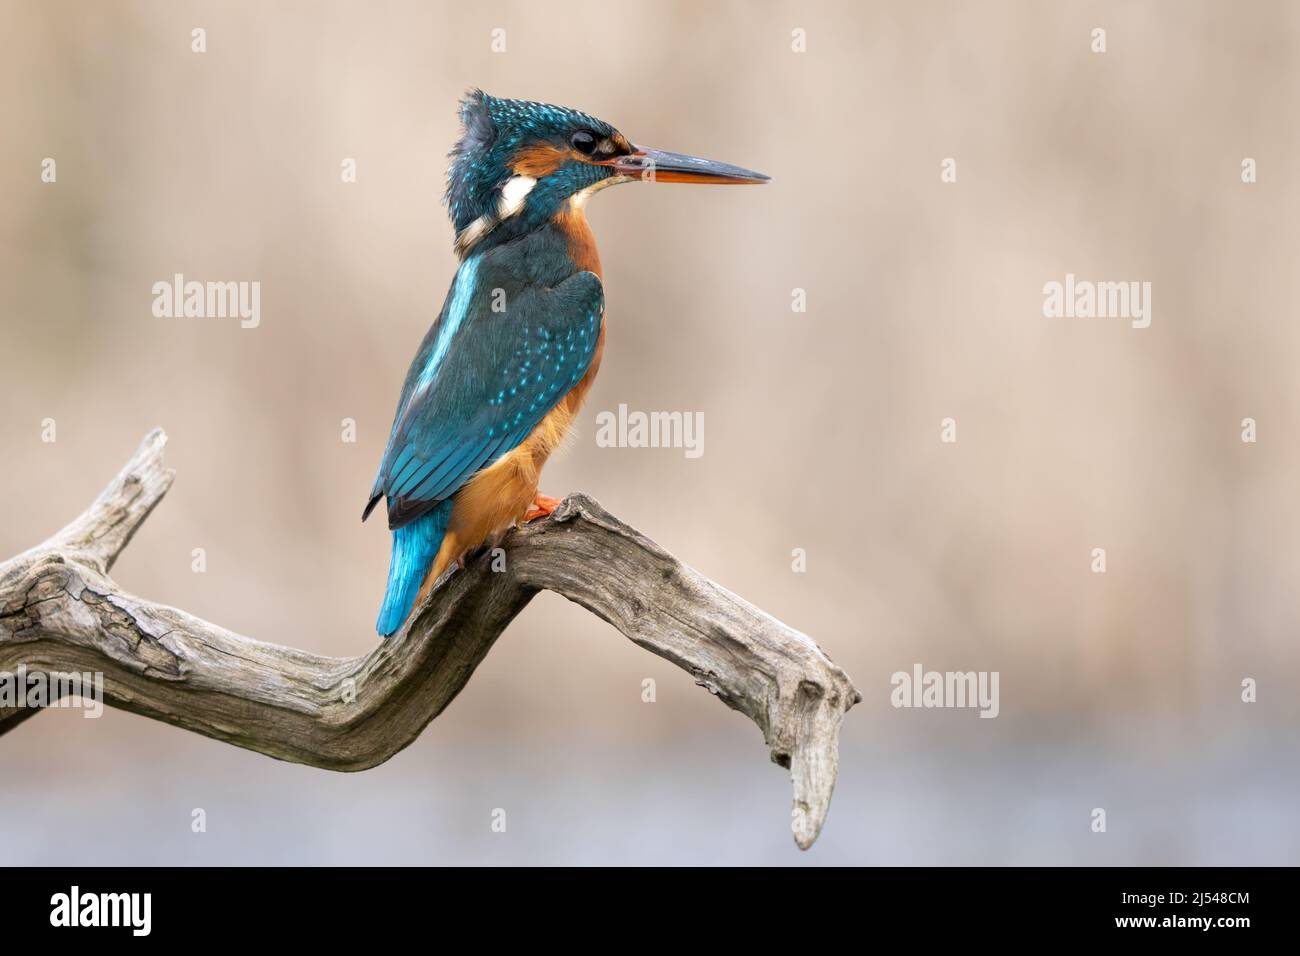 Kingfisher Perched Stock Photo